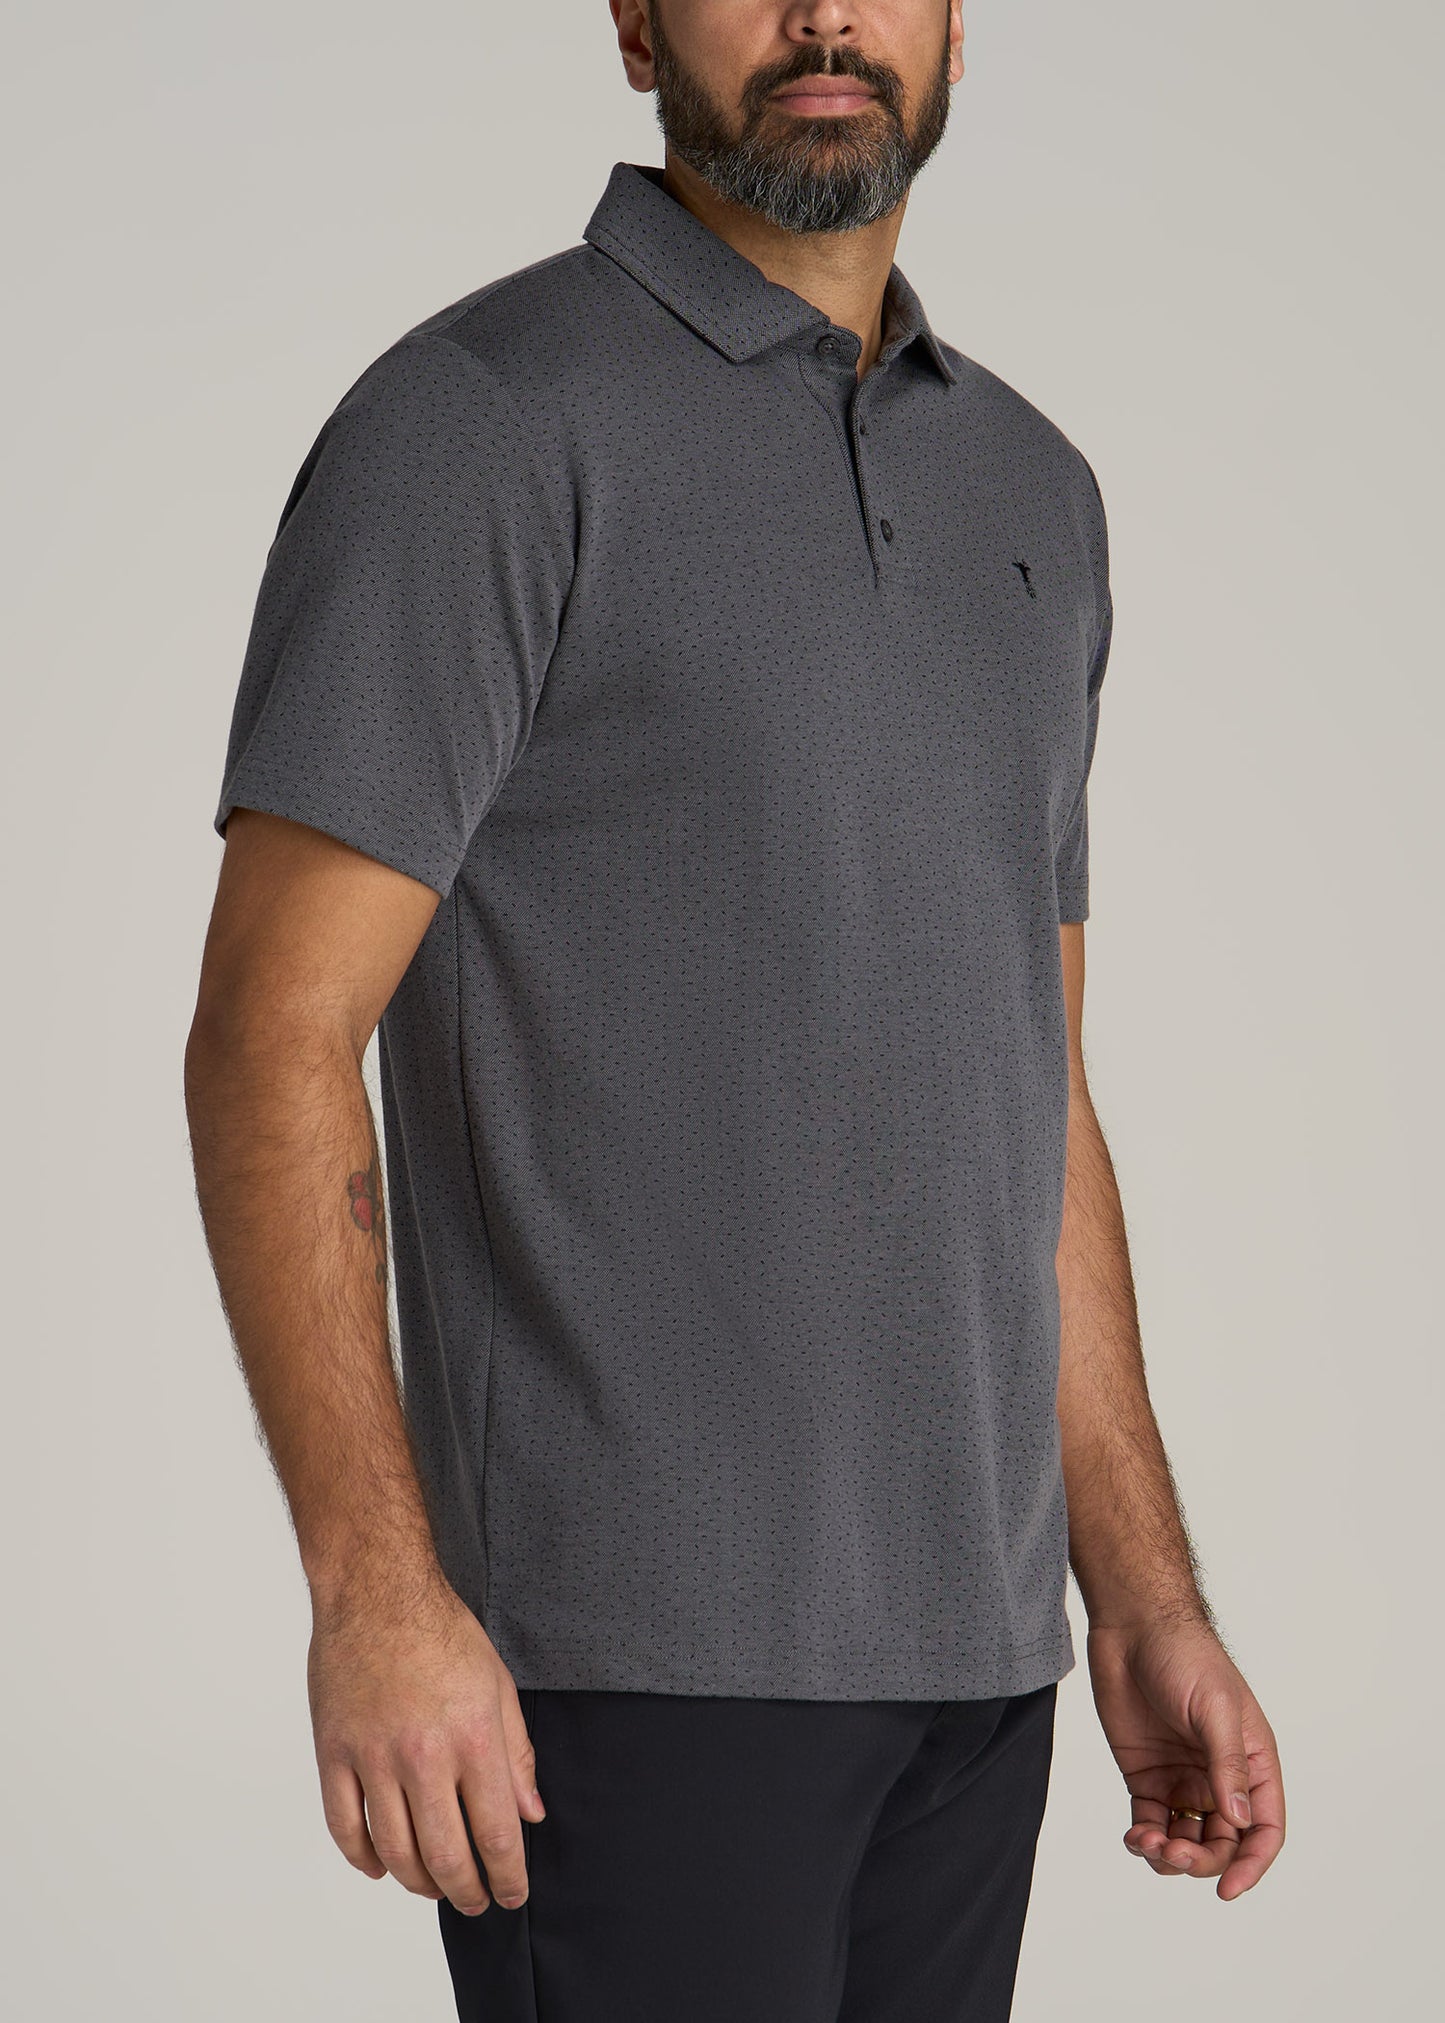 Cotton Stretch Print Polo Shirt for Tall Men in Charcoal Pindot